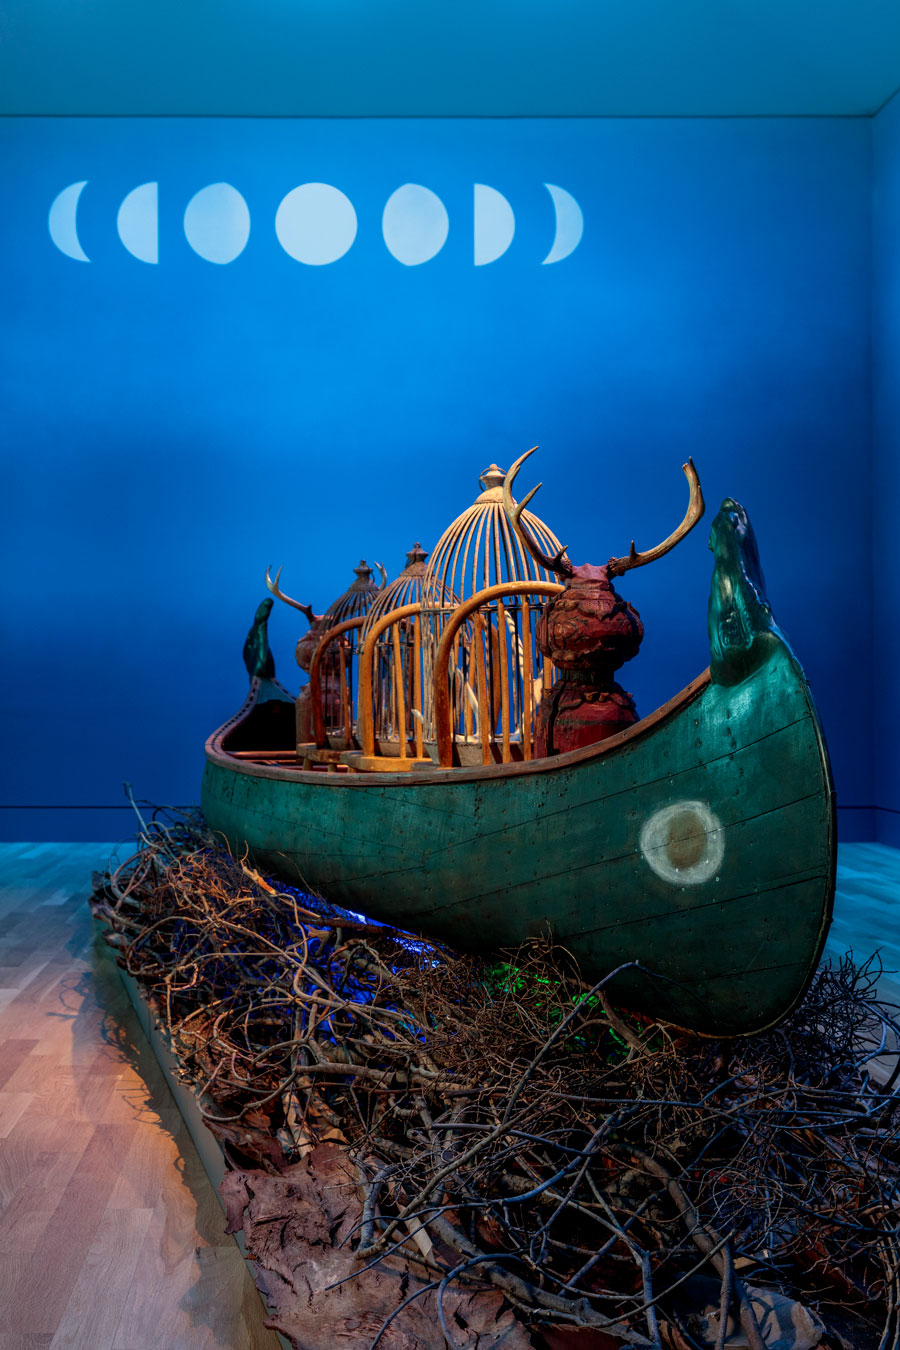 A wood canoe sits on top of a bed of dry branches in a blue room with phases of the moon painted on the wall.